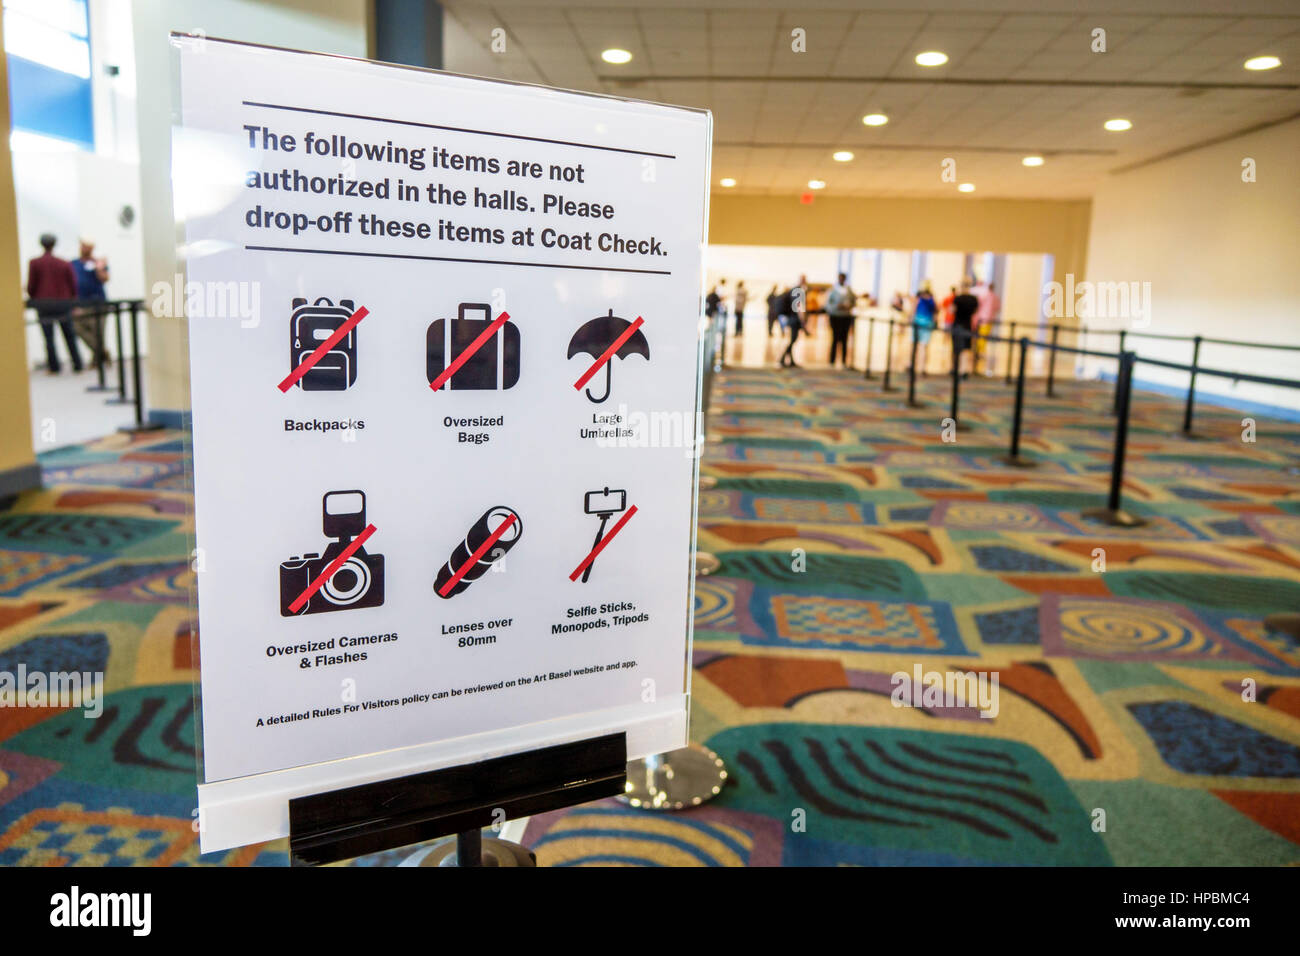 Miami Beach Florida,Convention Center,interior inside,Coat Check,sign,prohibited items,rules,no backpacks,oversize camera,lens,selfie stick,bags,FL161 Stock Photo